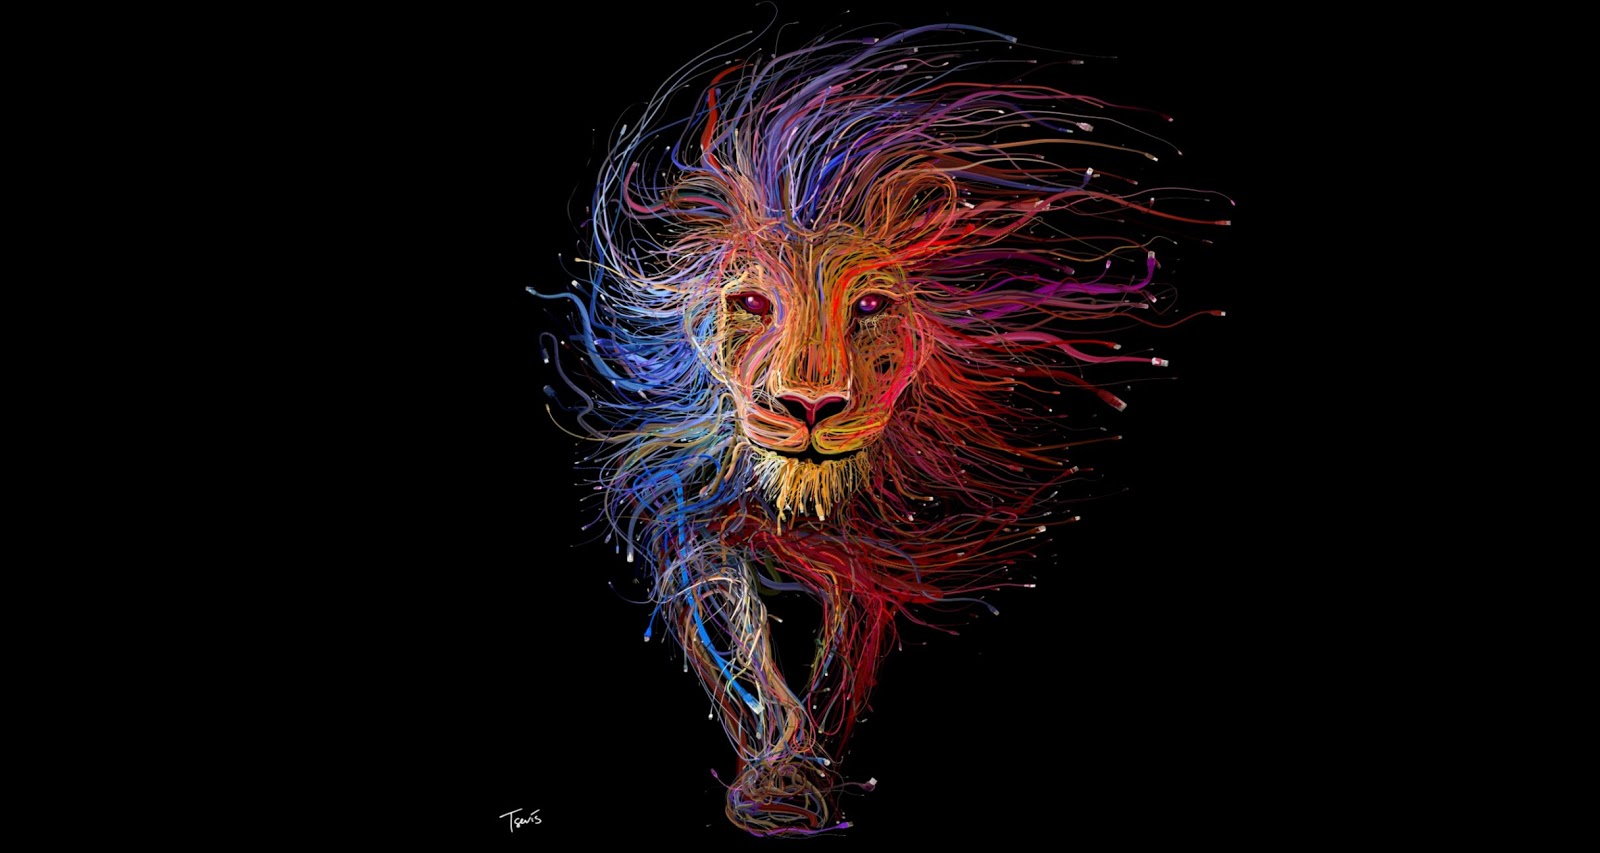 Lion Wires Art 720p Hd 4k Wallpapers Images Backgrounds - Leo Wallpaper Hd  - 1600x853 Wallpaper 